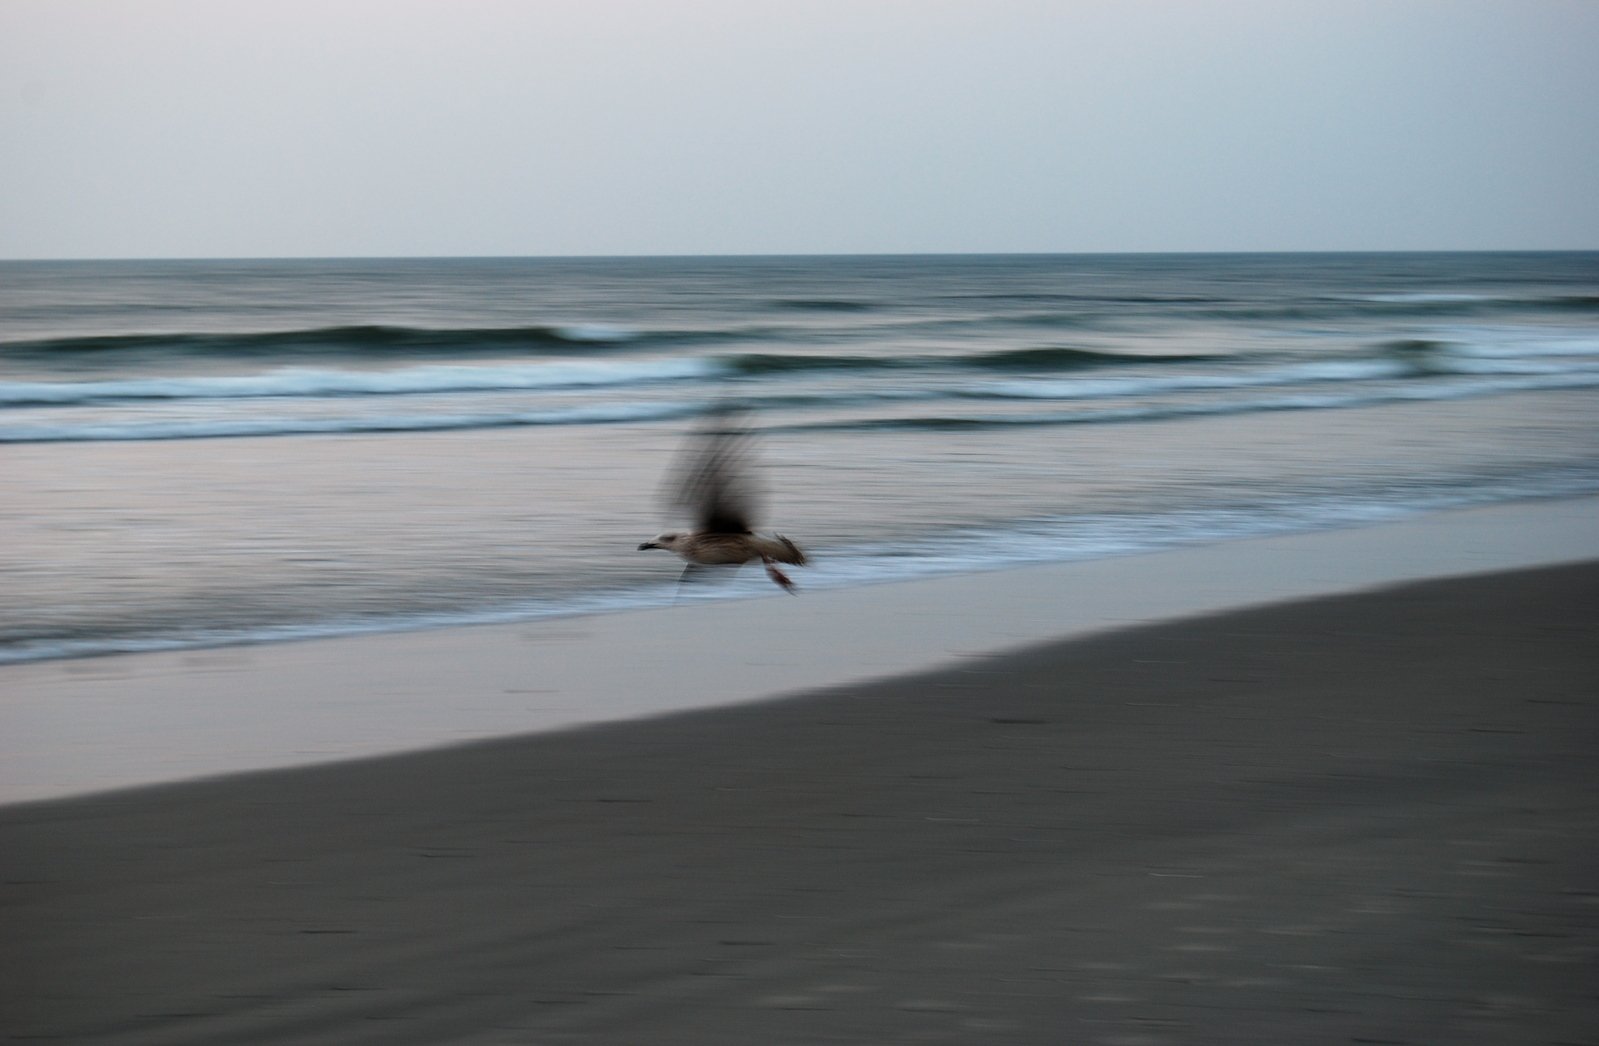 two birds flying over the beach in front of a body of water